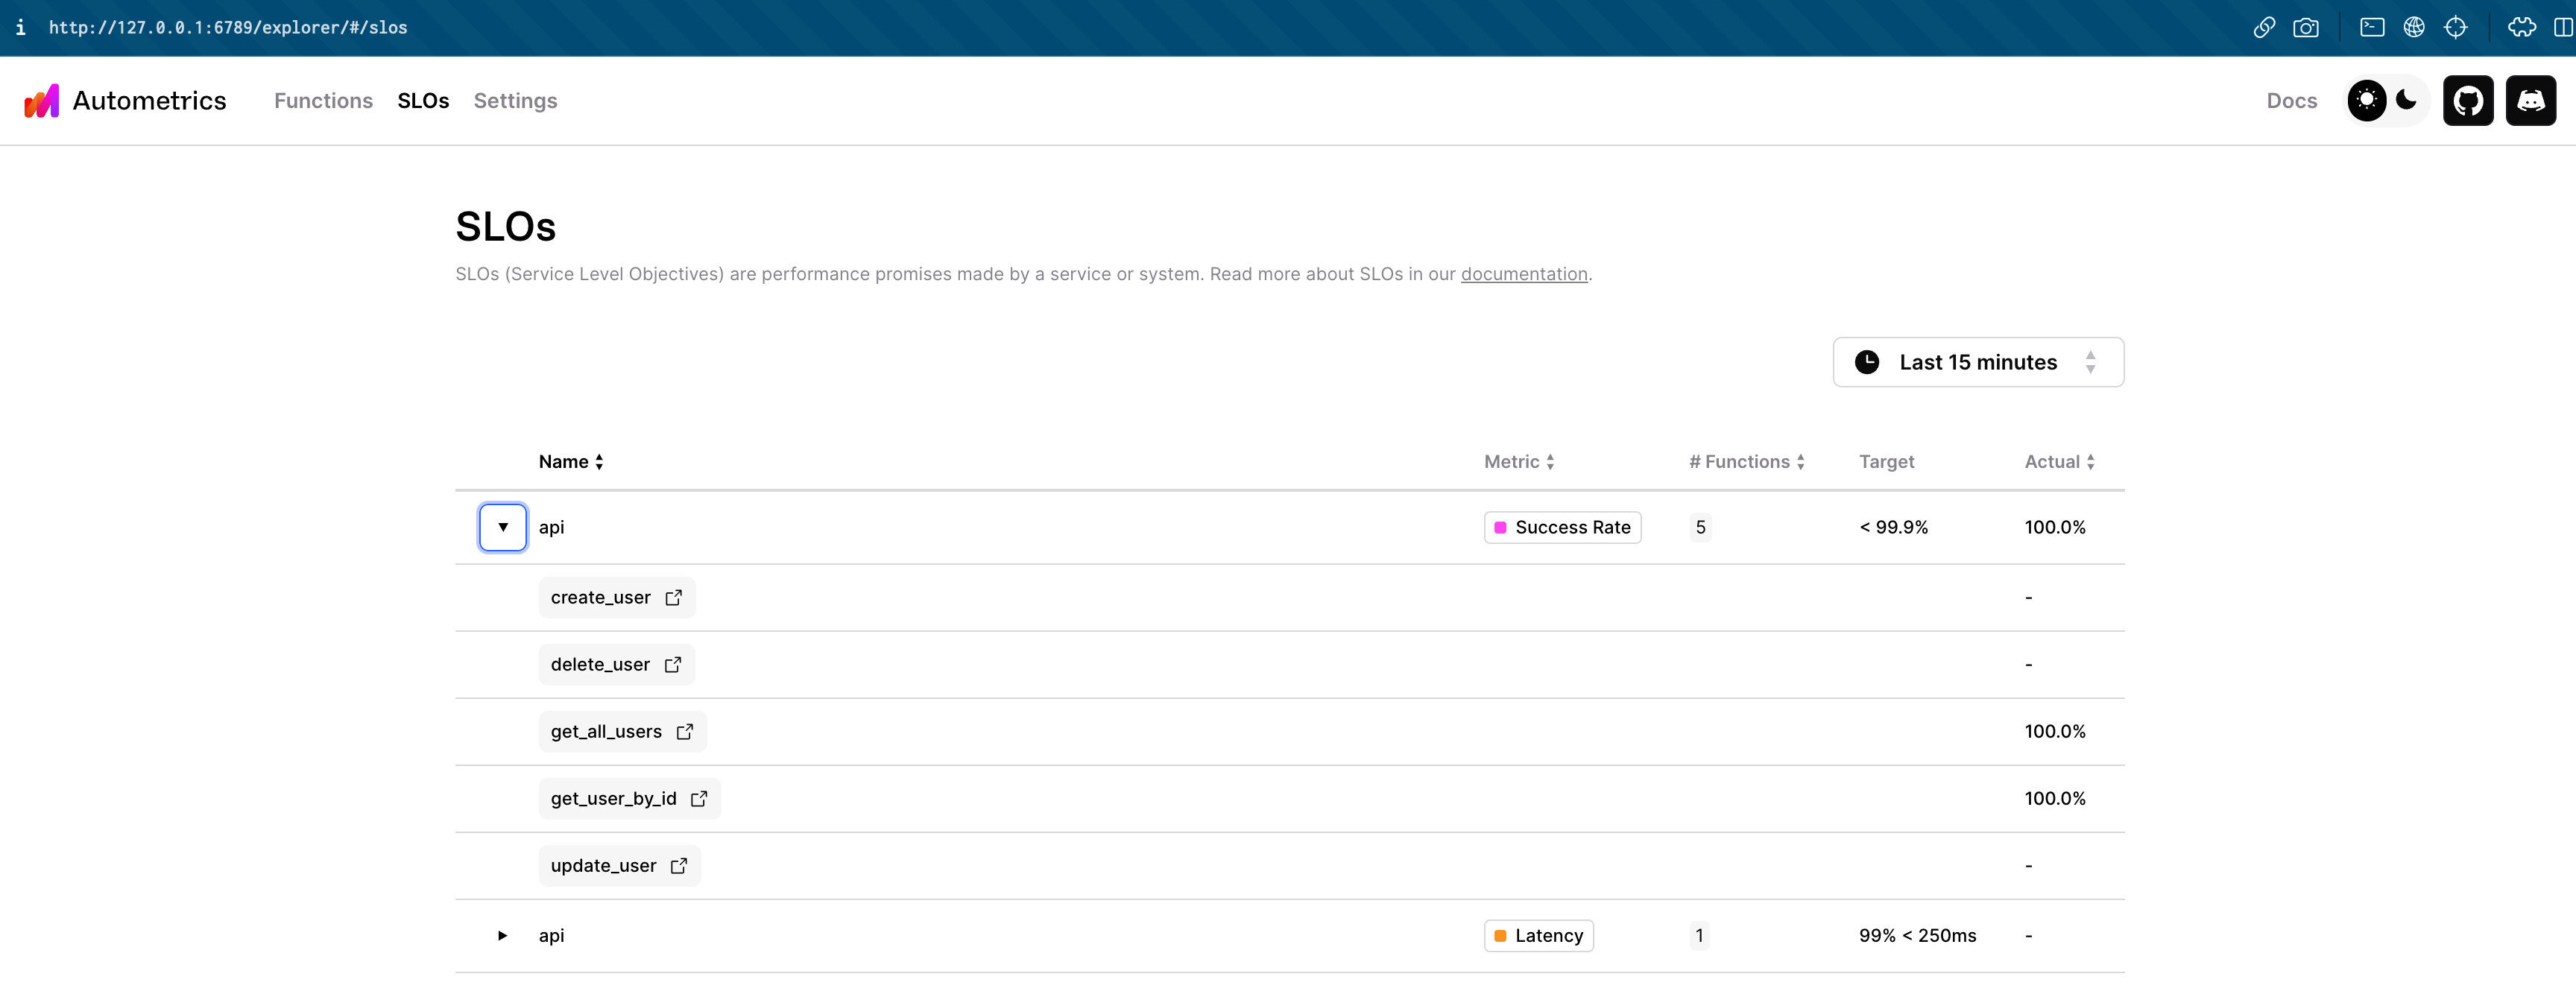 You can preview your SLOs in the Autometrics Explorer